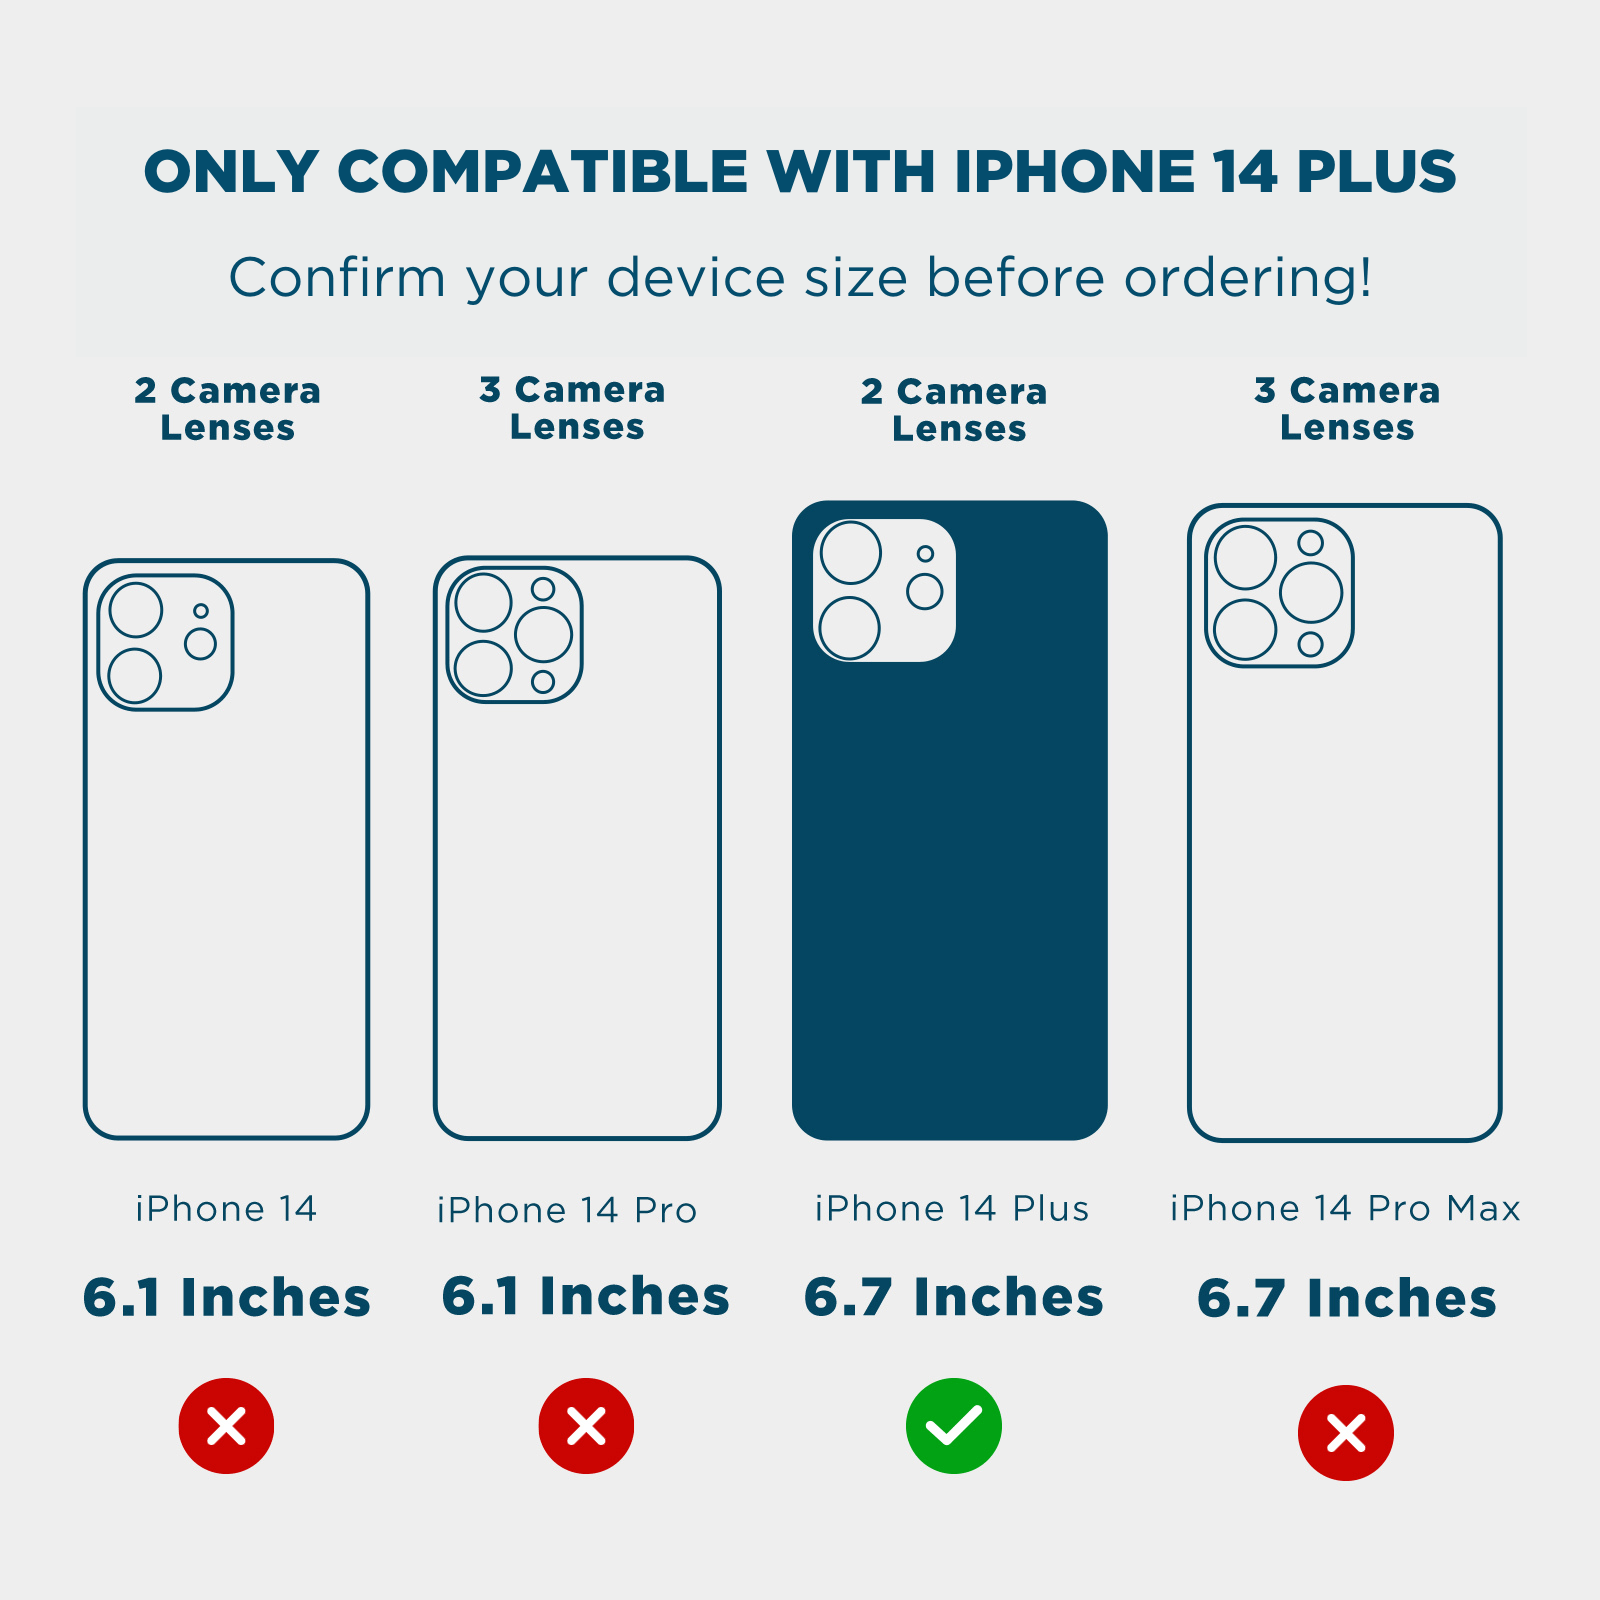 ONLY COMPATIBLE WITH IPHONE 14 PLUS. CONFIRM YOUR DEVICE SIZE BEFORE ORDERING! 2 CAMERA LENSES, 3 CAMERA LENSES, 2 CAMERA LENSES, 3 CAMERA LENSES, 6.1 INCHEC, 6.1 INCHES, 6.7 INCHES, 6.7 INCHES. COLOR::CLEAR